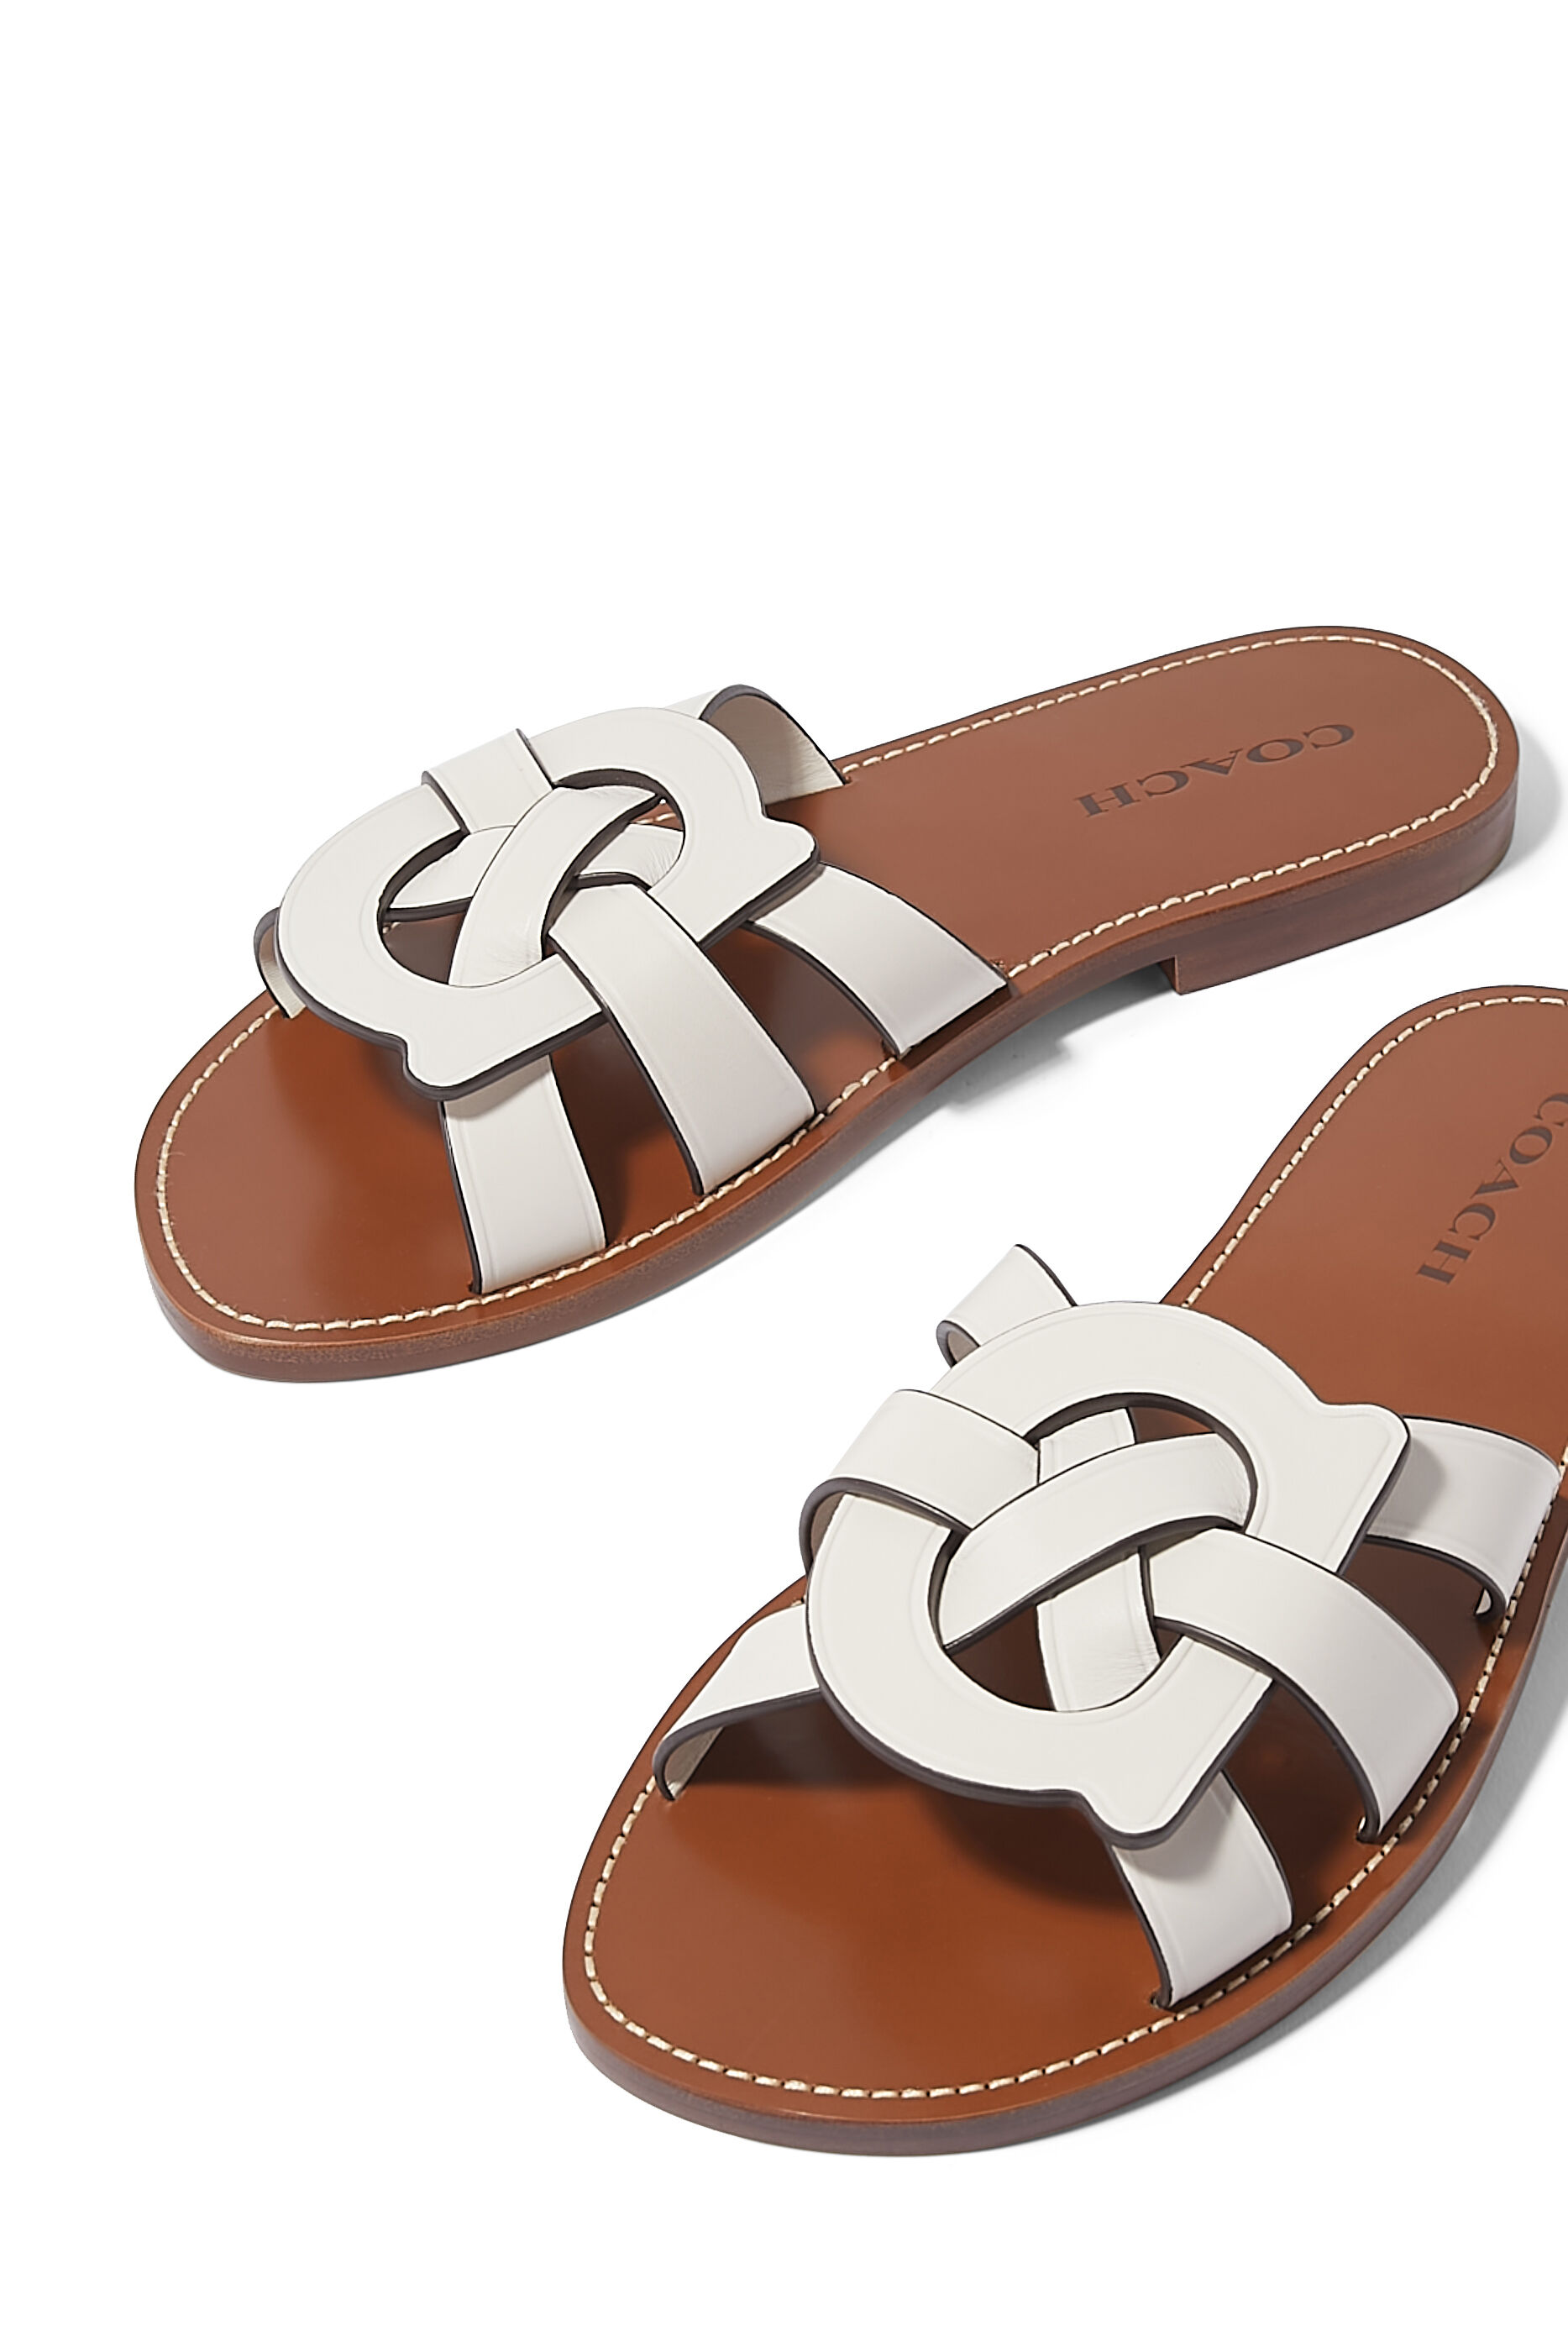 Coach Issaa leather flat sandals - Brown